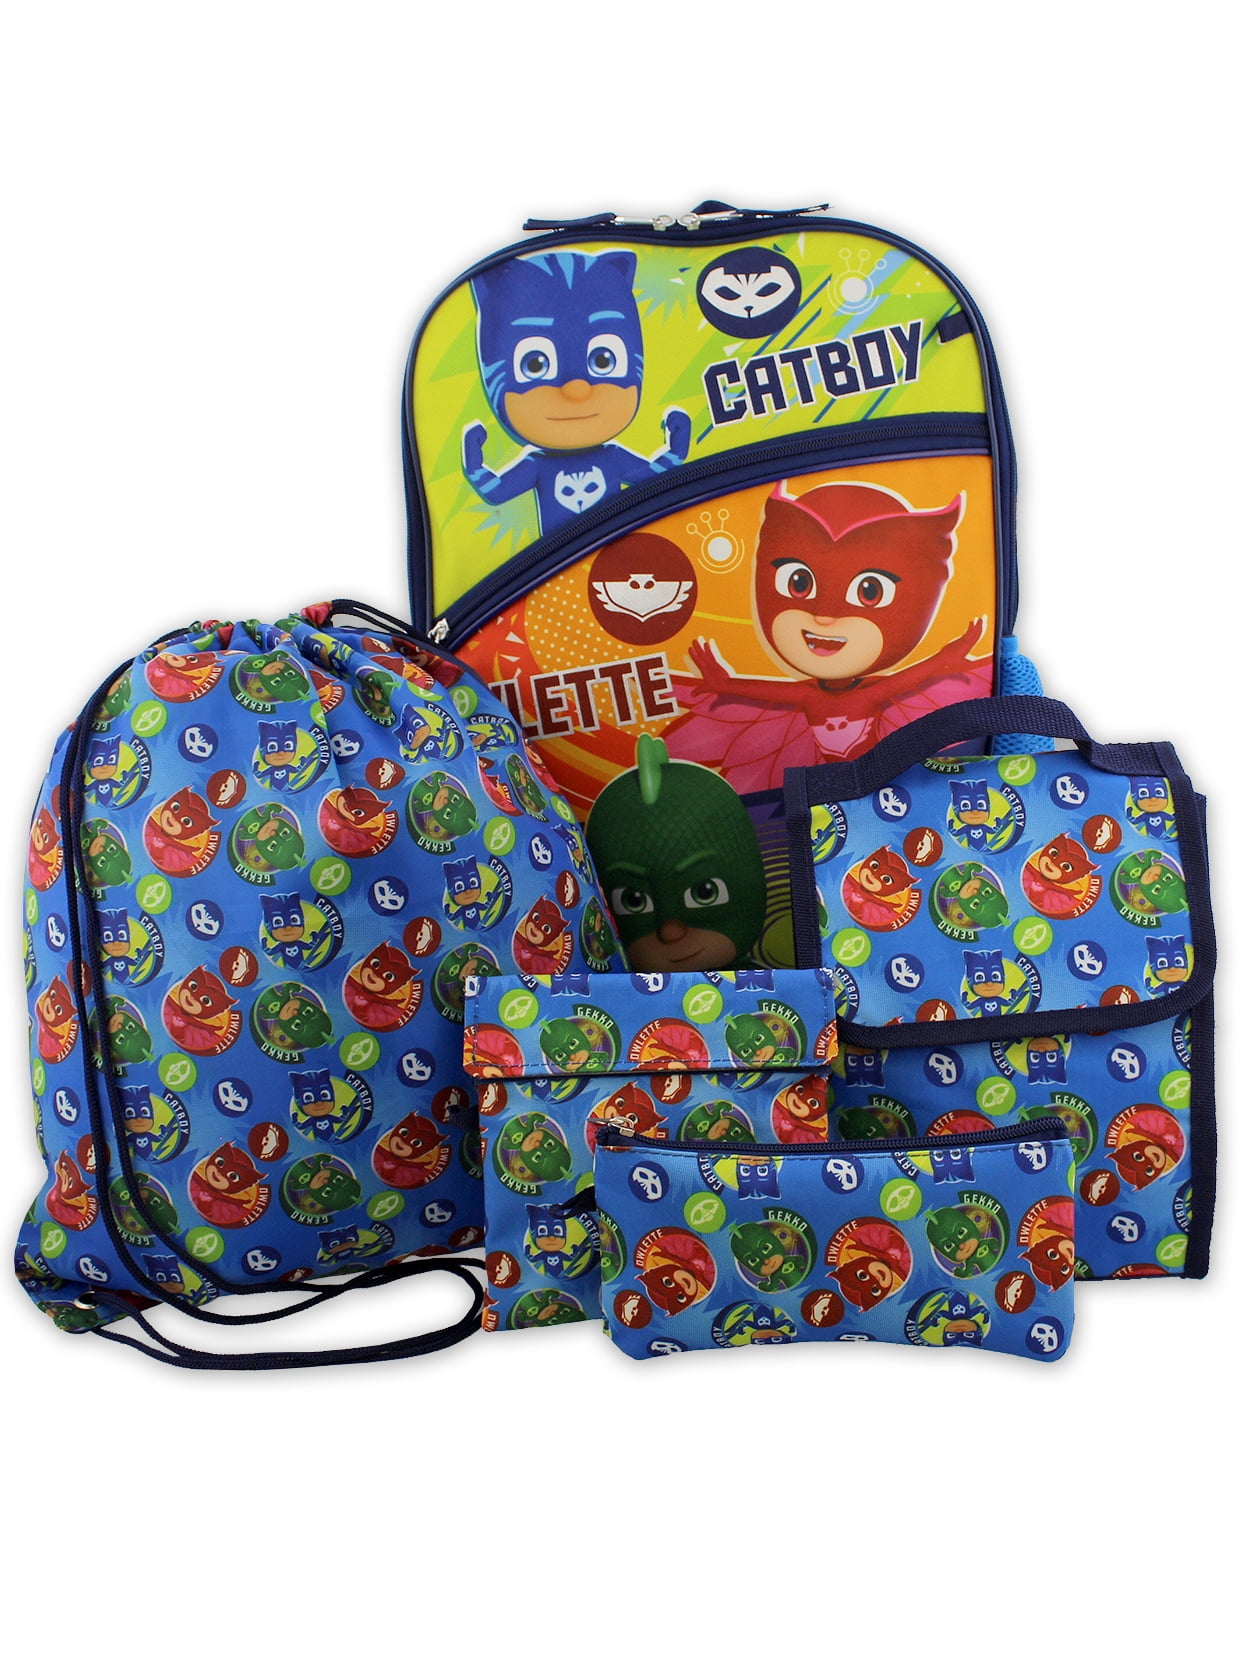 New PJ Masks School Lunch Bag Insulated Lunch Bag Child Kids Boys lunch bag 